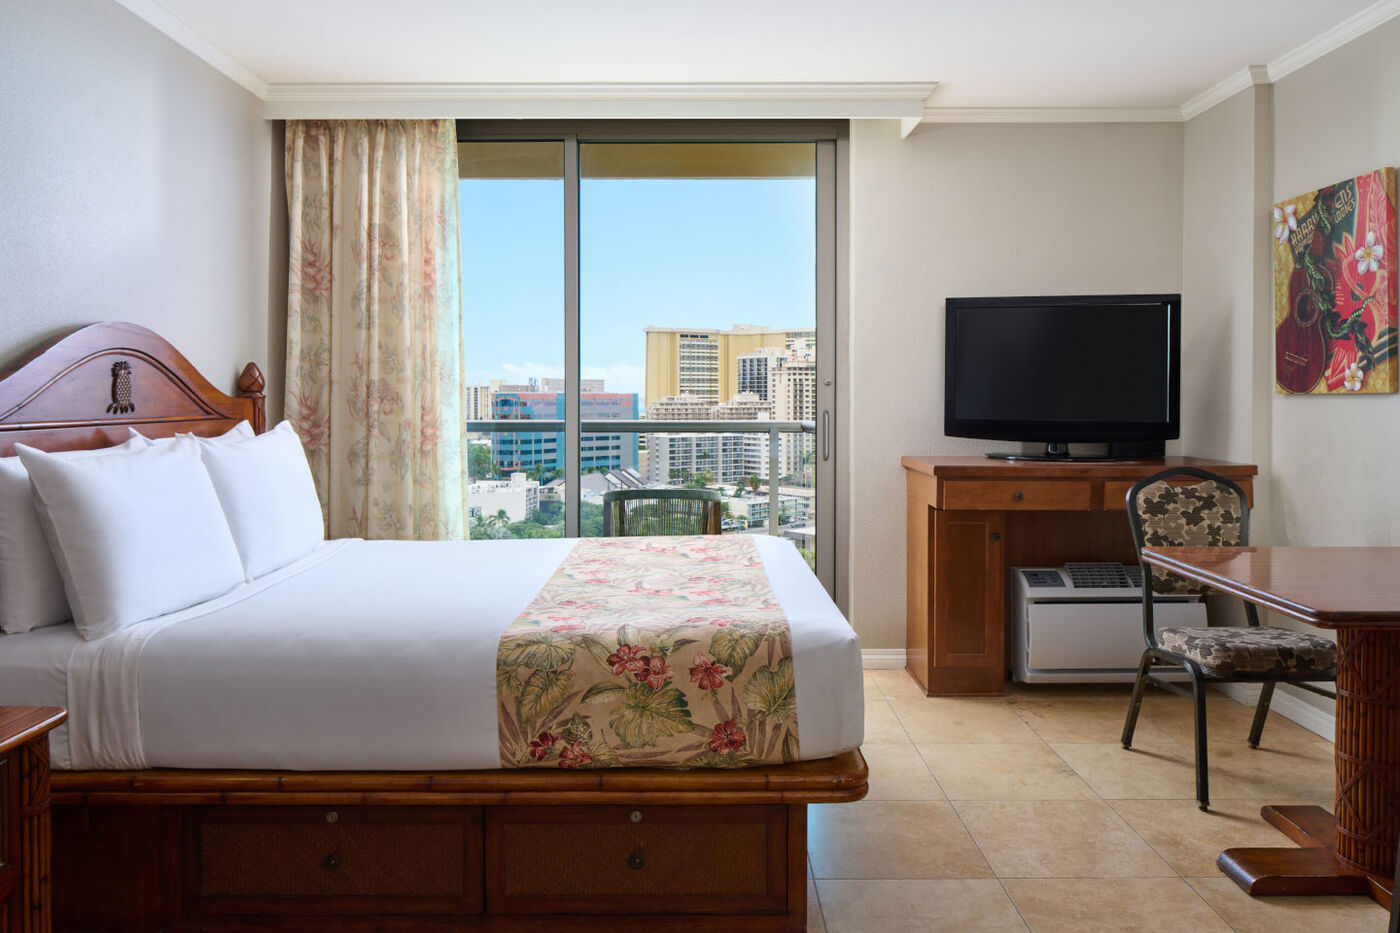 Partial Ocean View Room with a bed, desk, flatscreen TV and a private balcony